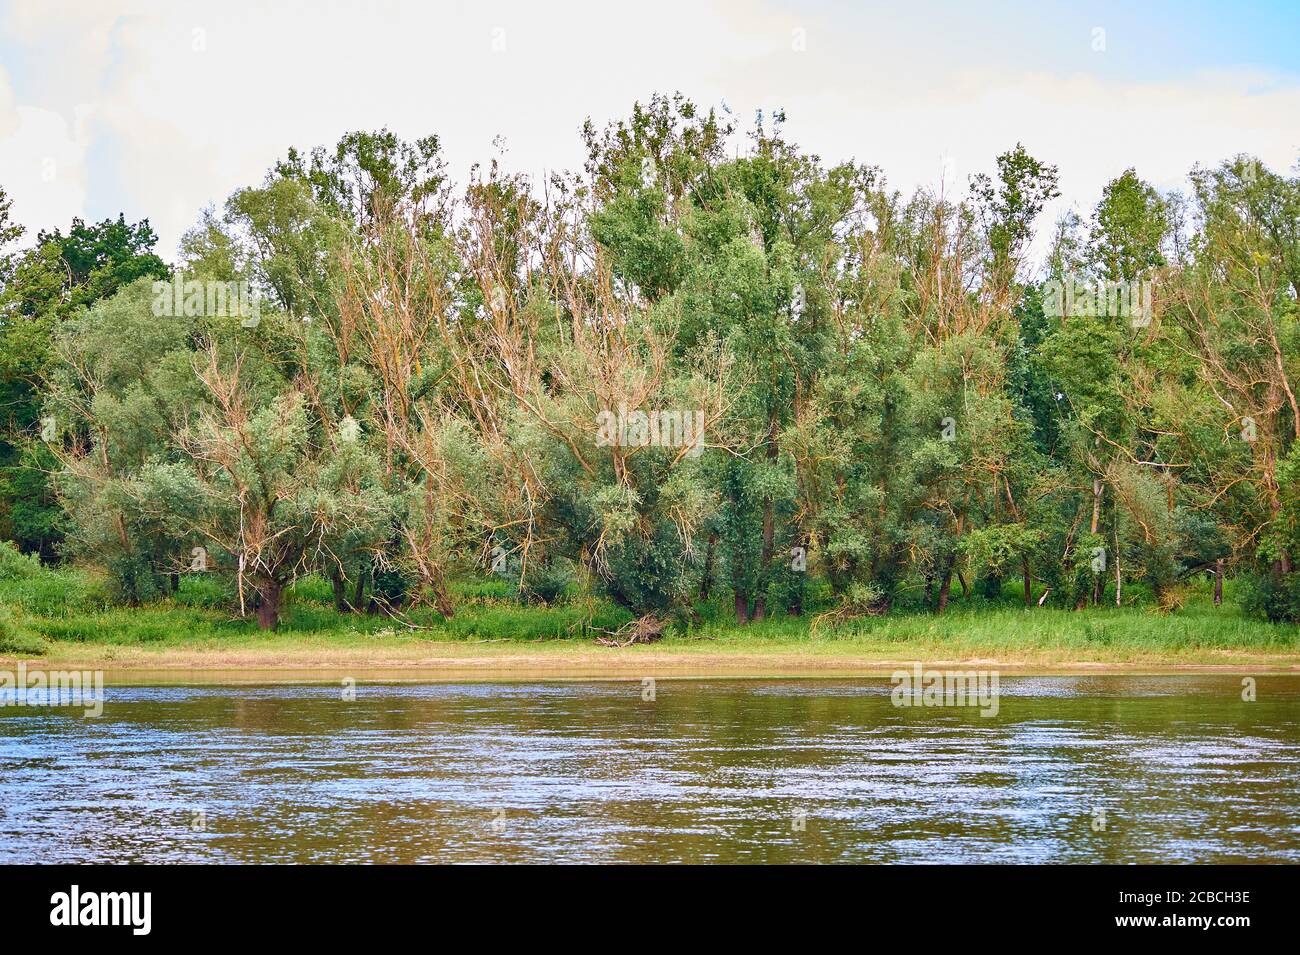 A floodplain forest at the river banks in the Elbe river floodplains Stock Photo